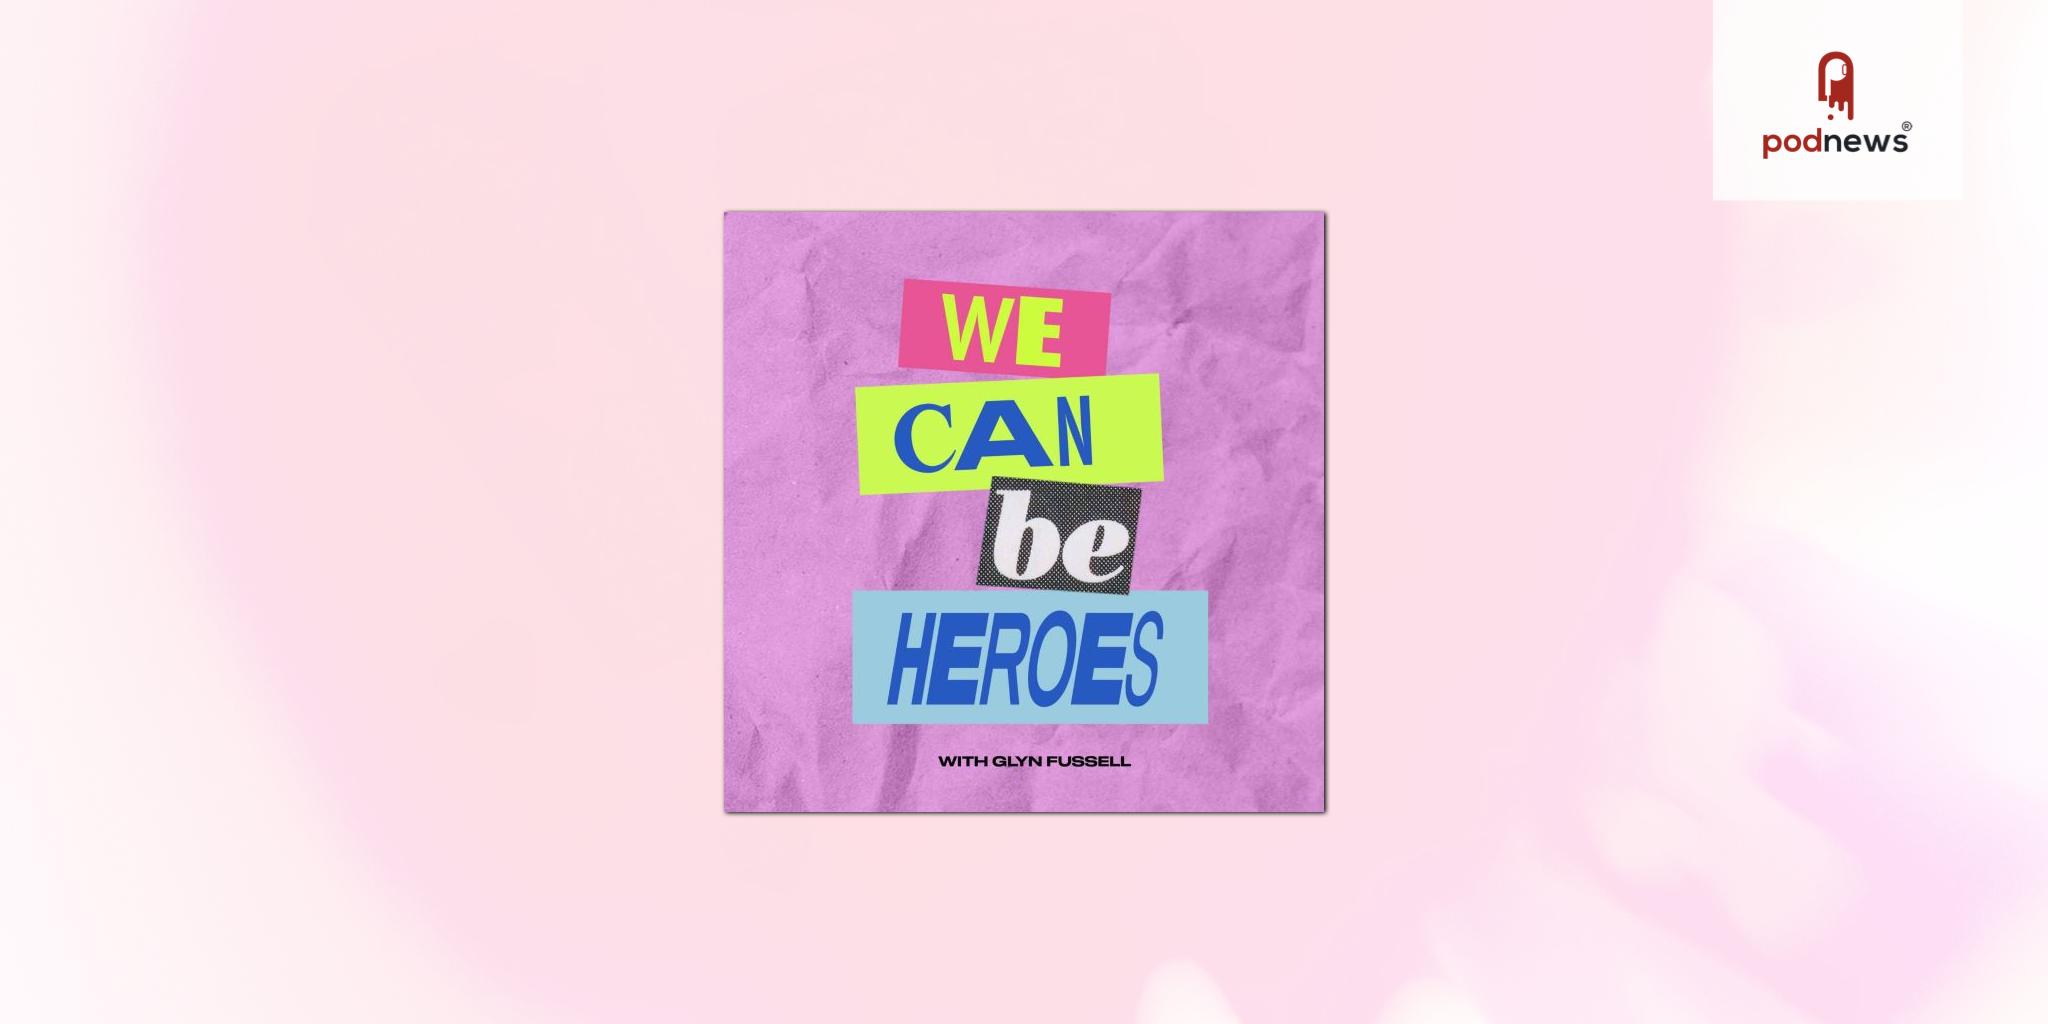 We Can Be Heroes celebrates people who have pushed through boundaries